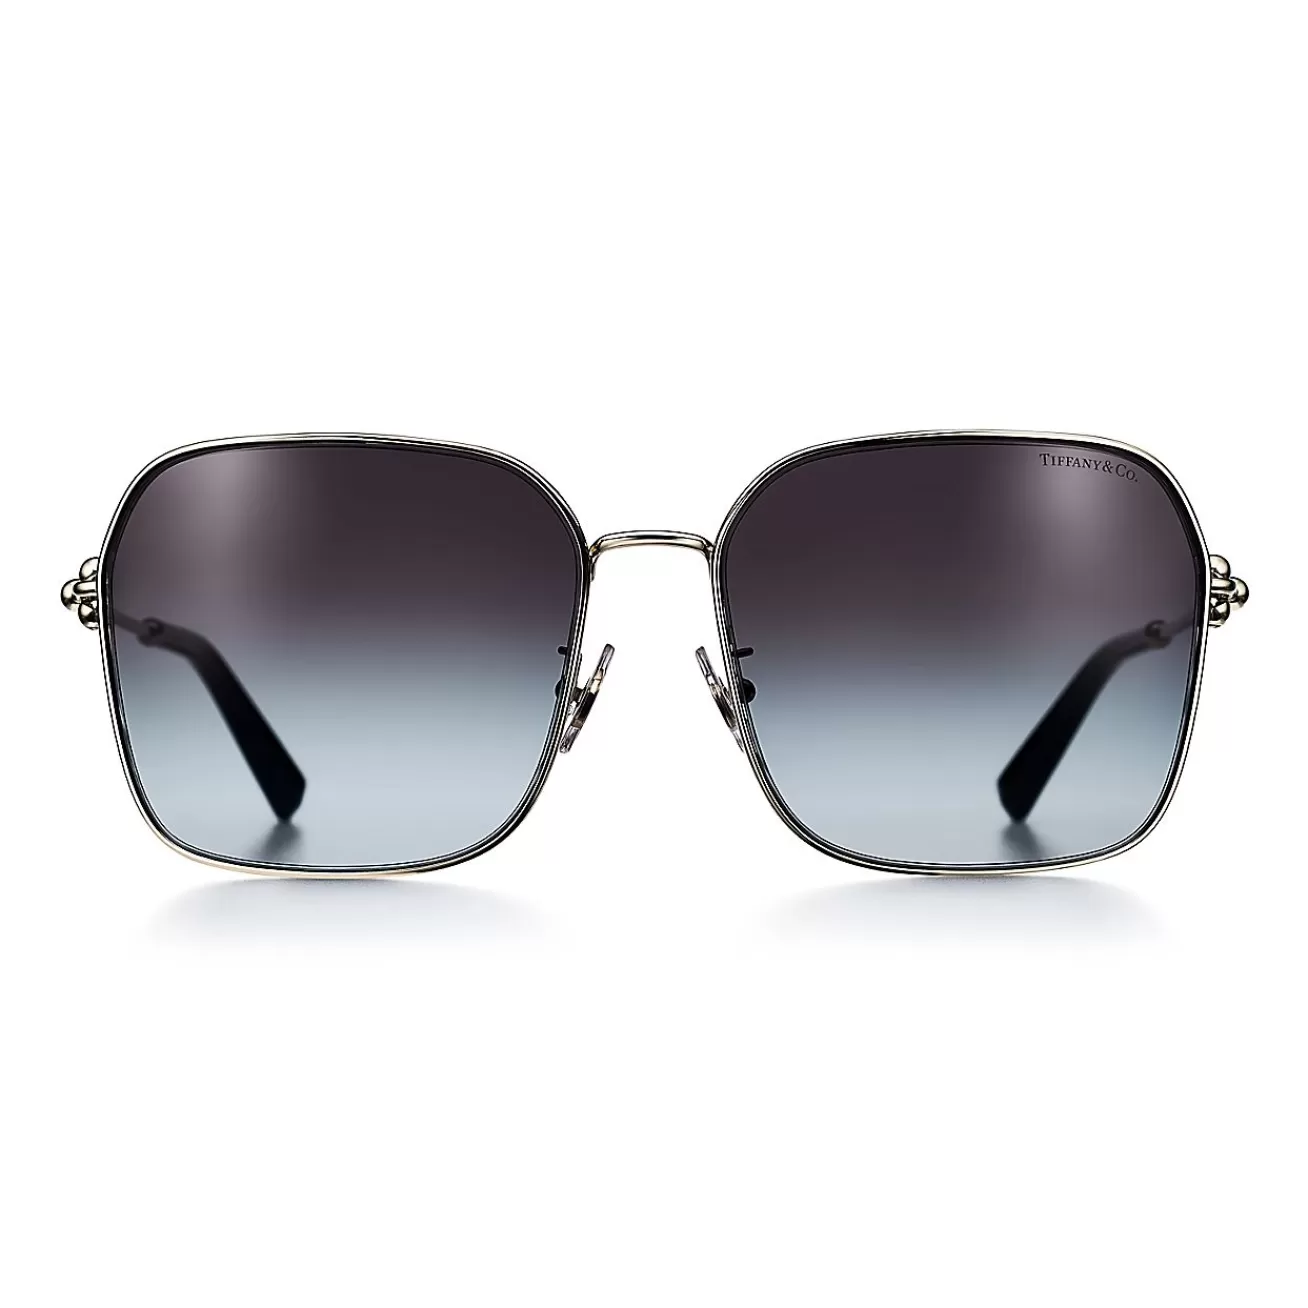 Tiffany & Co. Tiffany HardWear Sunglasses in Pale Gold-colored Metal with Gray Lenses | ^Women Tiffany HardWear | Sunglasses